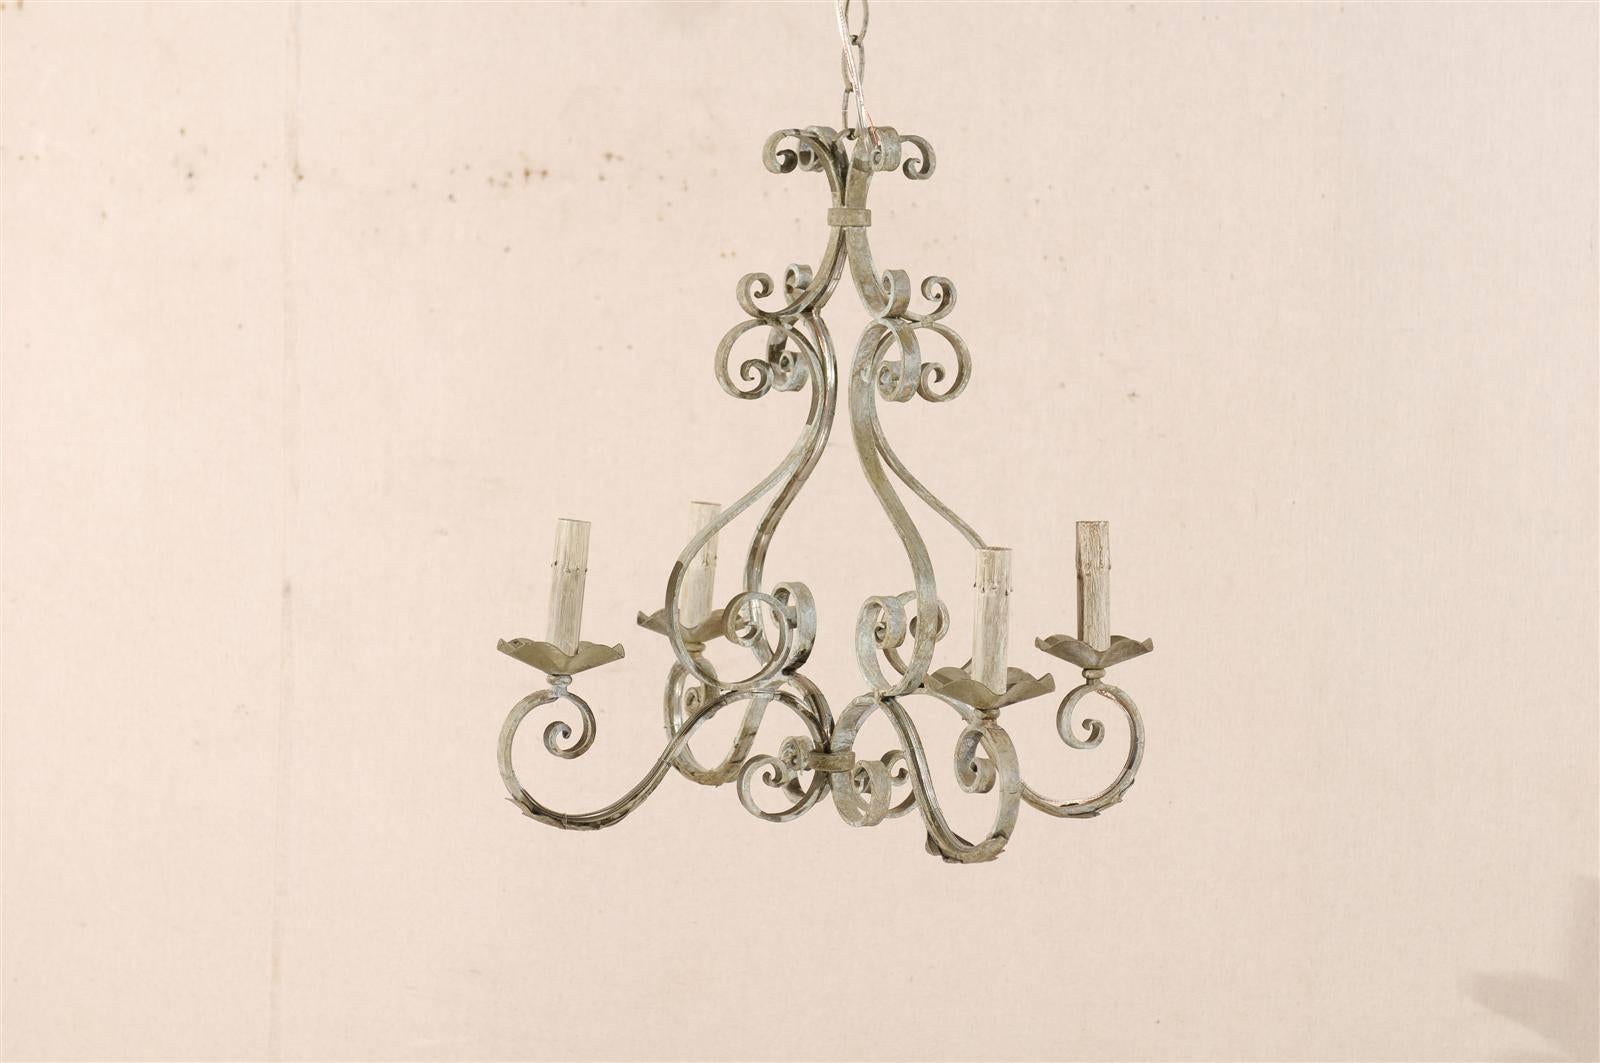 A French four-light painted iron chandelier. This light grey with a blue undertone chandelier is made of various C-scroll over S-scroll volutes supporting the four flower-shaped bobèches and painted candle covers. This French painted iron